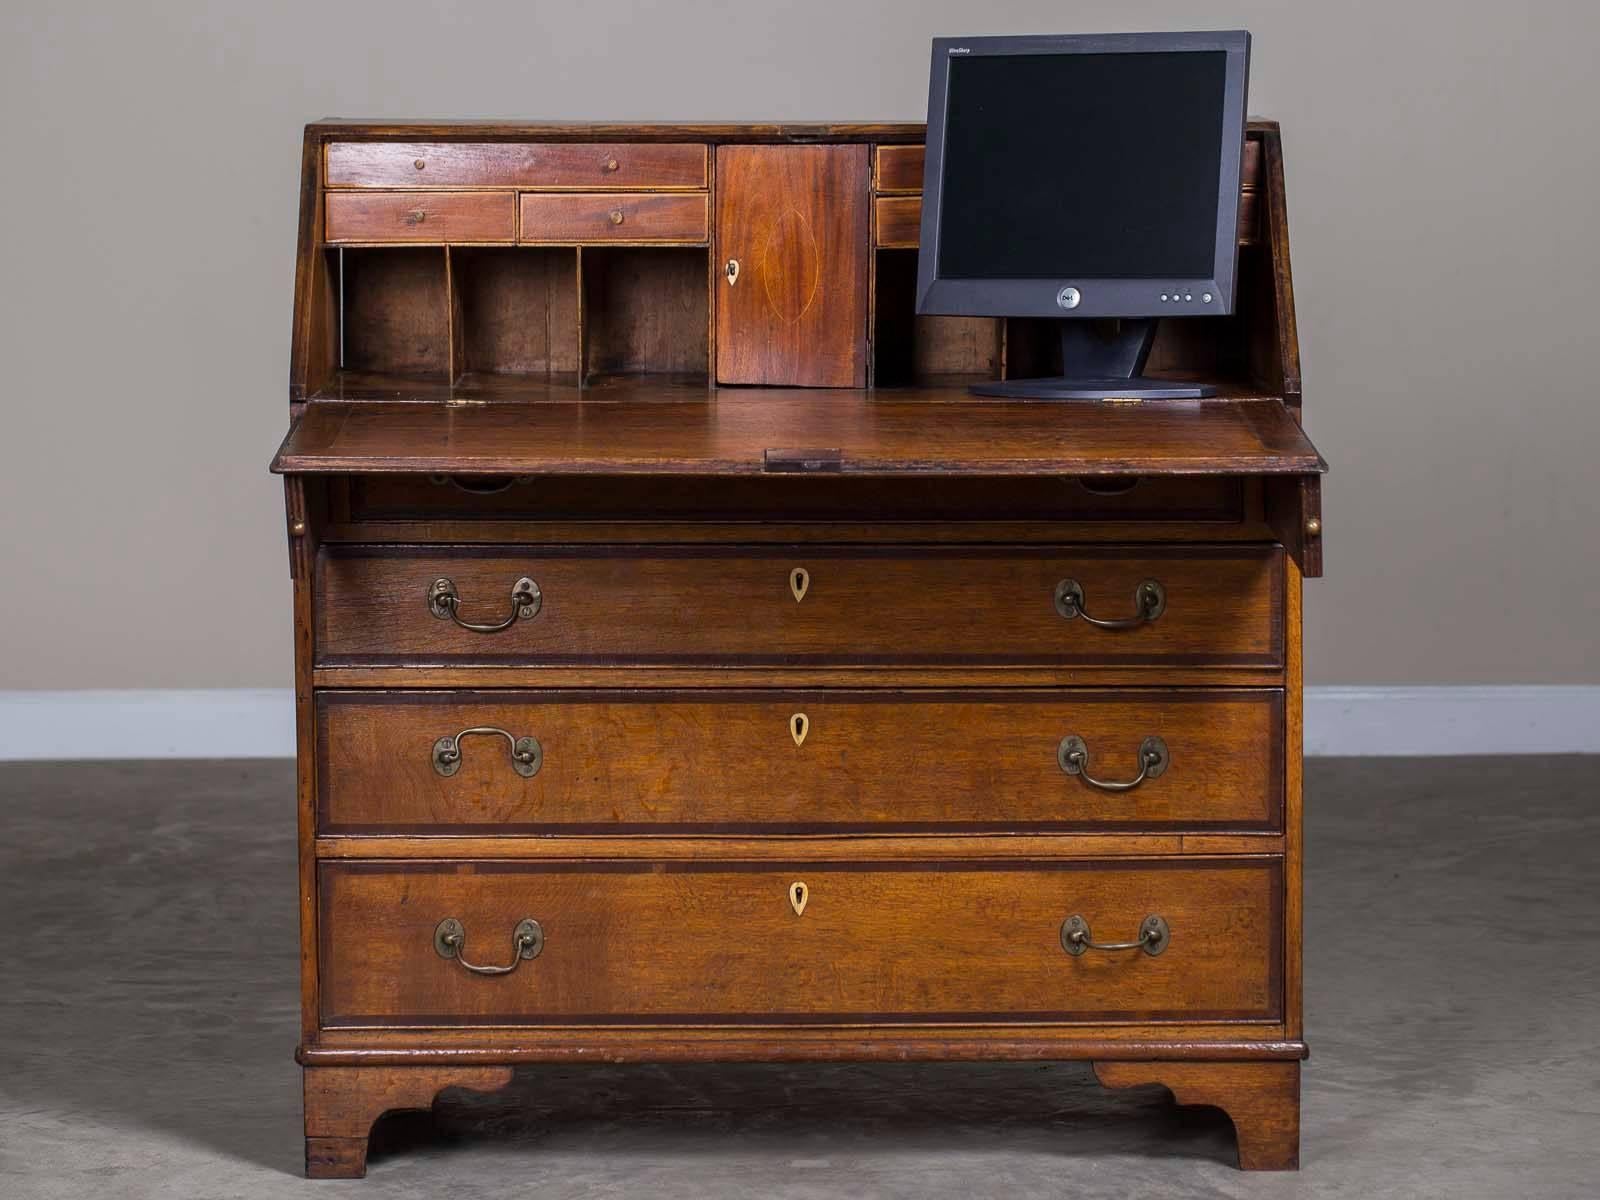 An antique English Georgian oak crossbanded with mahogany drop front secretary bureau chest desk from England, circa 1800 having a slant front supported by lopers. This handsome George III period oak desk has a beautiful patina from years of waxing